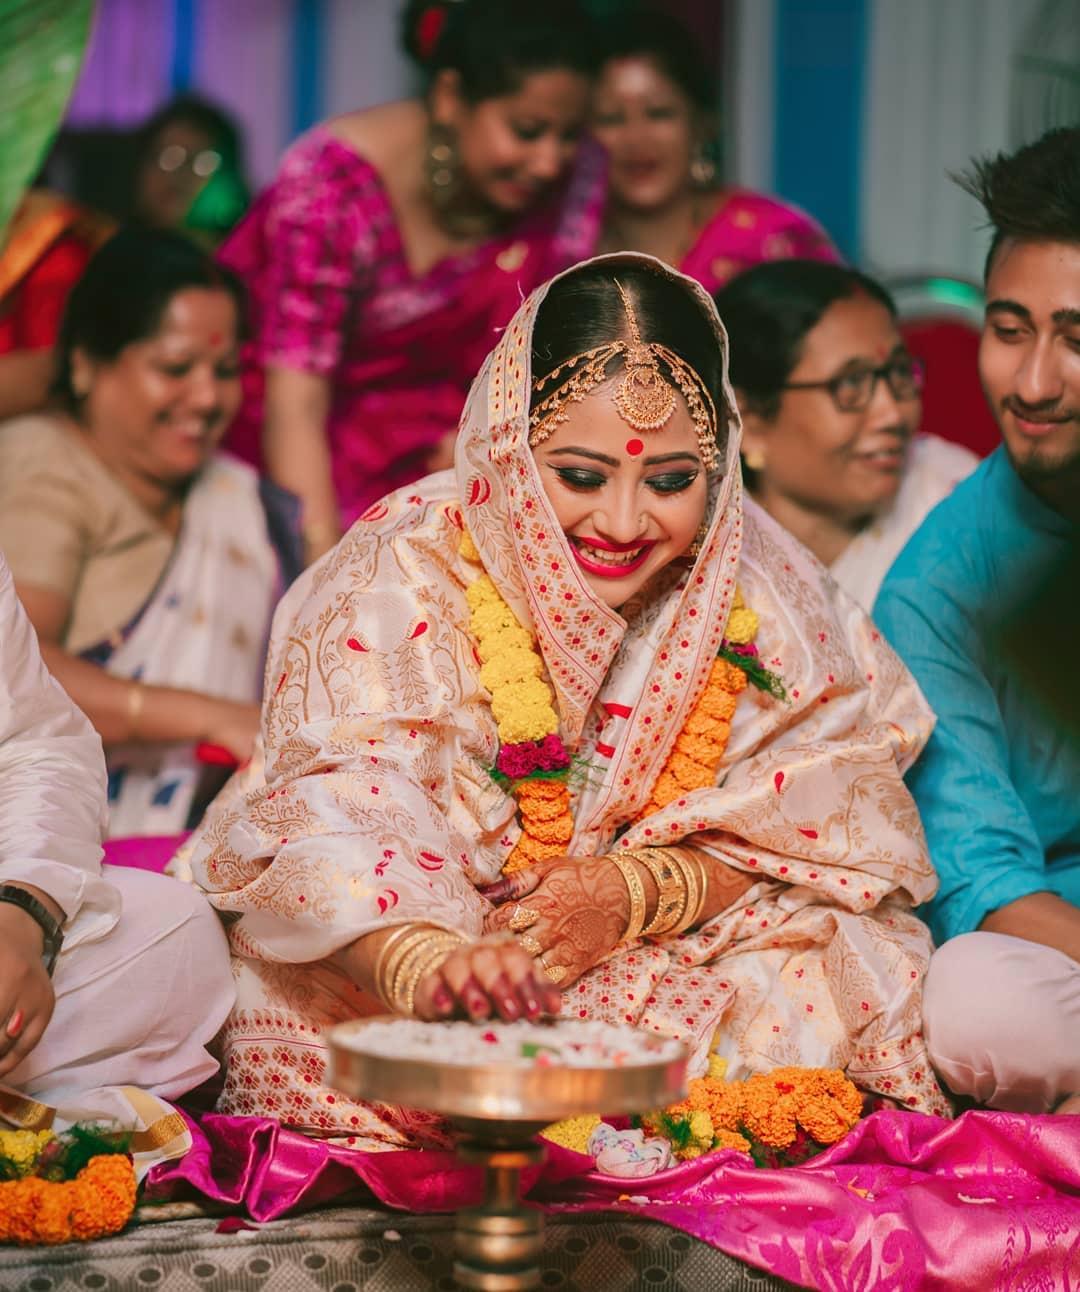 Juroon | This is the ceremony in Assamese wedding, mostly ha… | Flickr